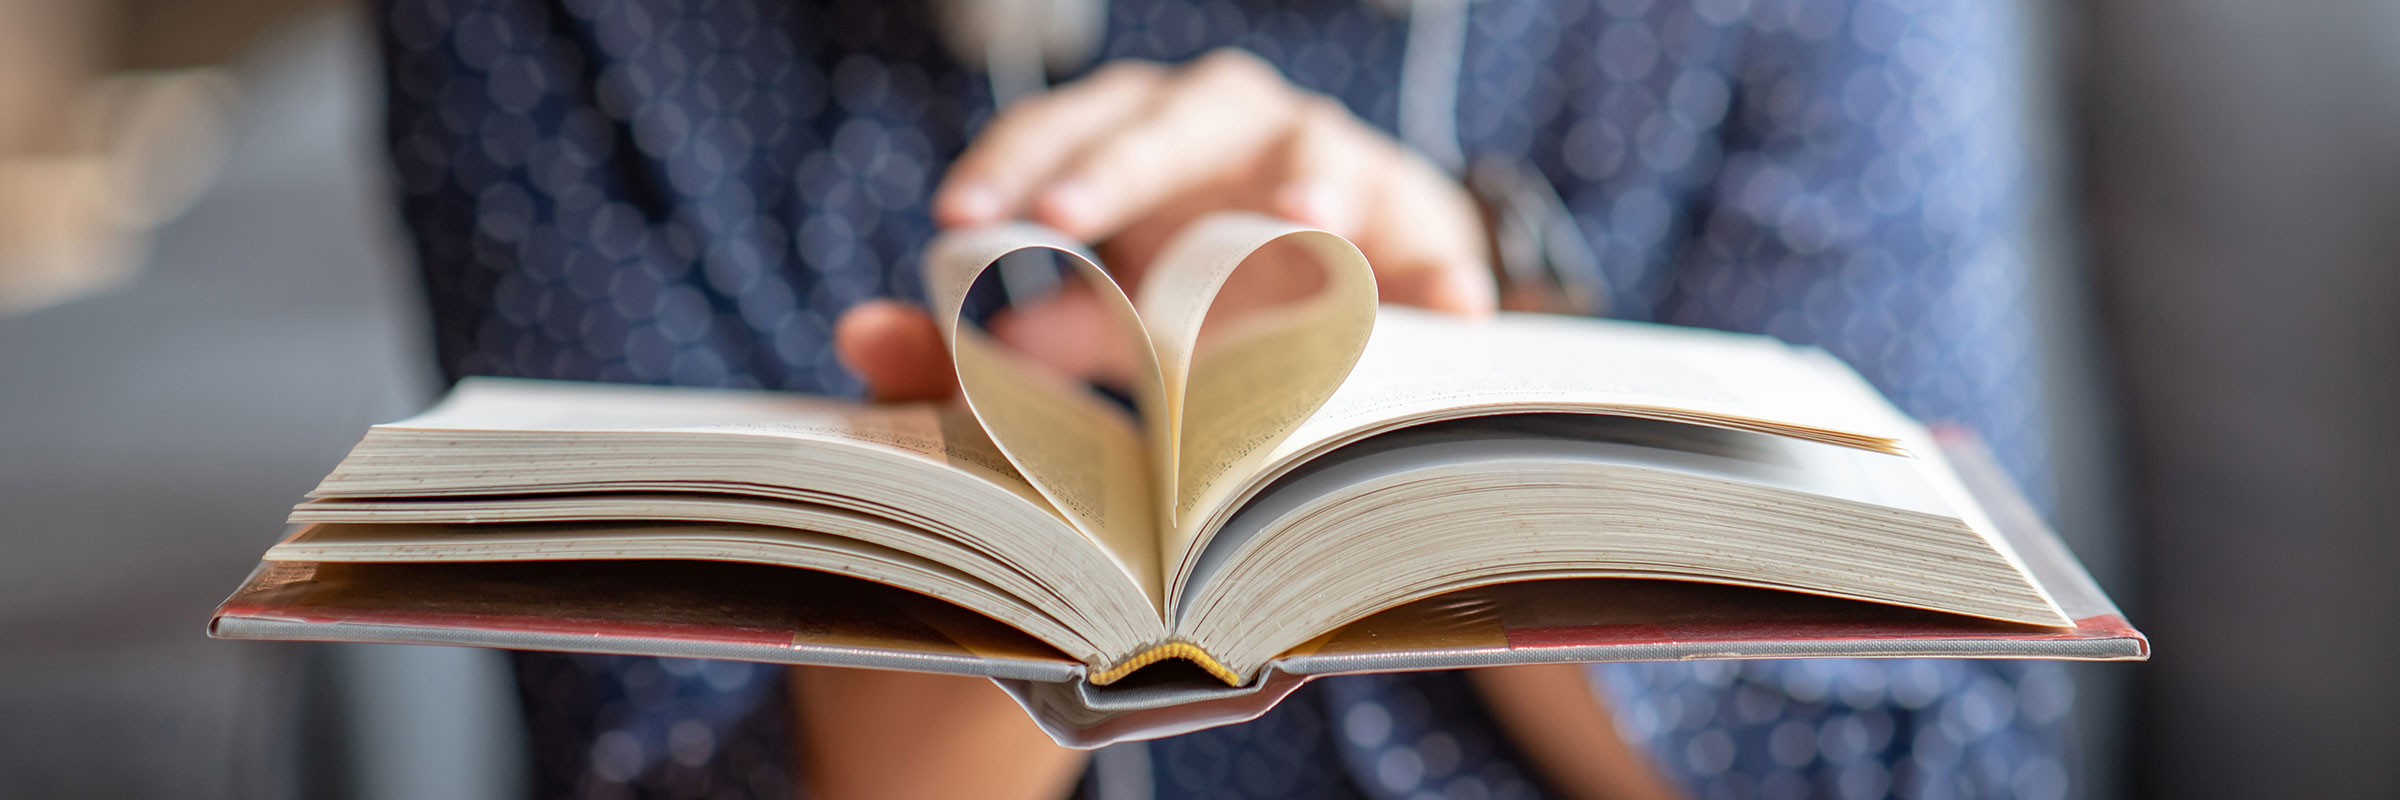 Person holding open book with inner pages folded into heart shape